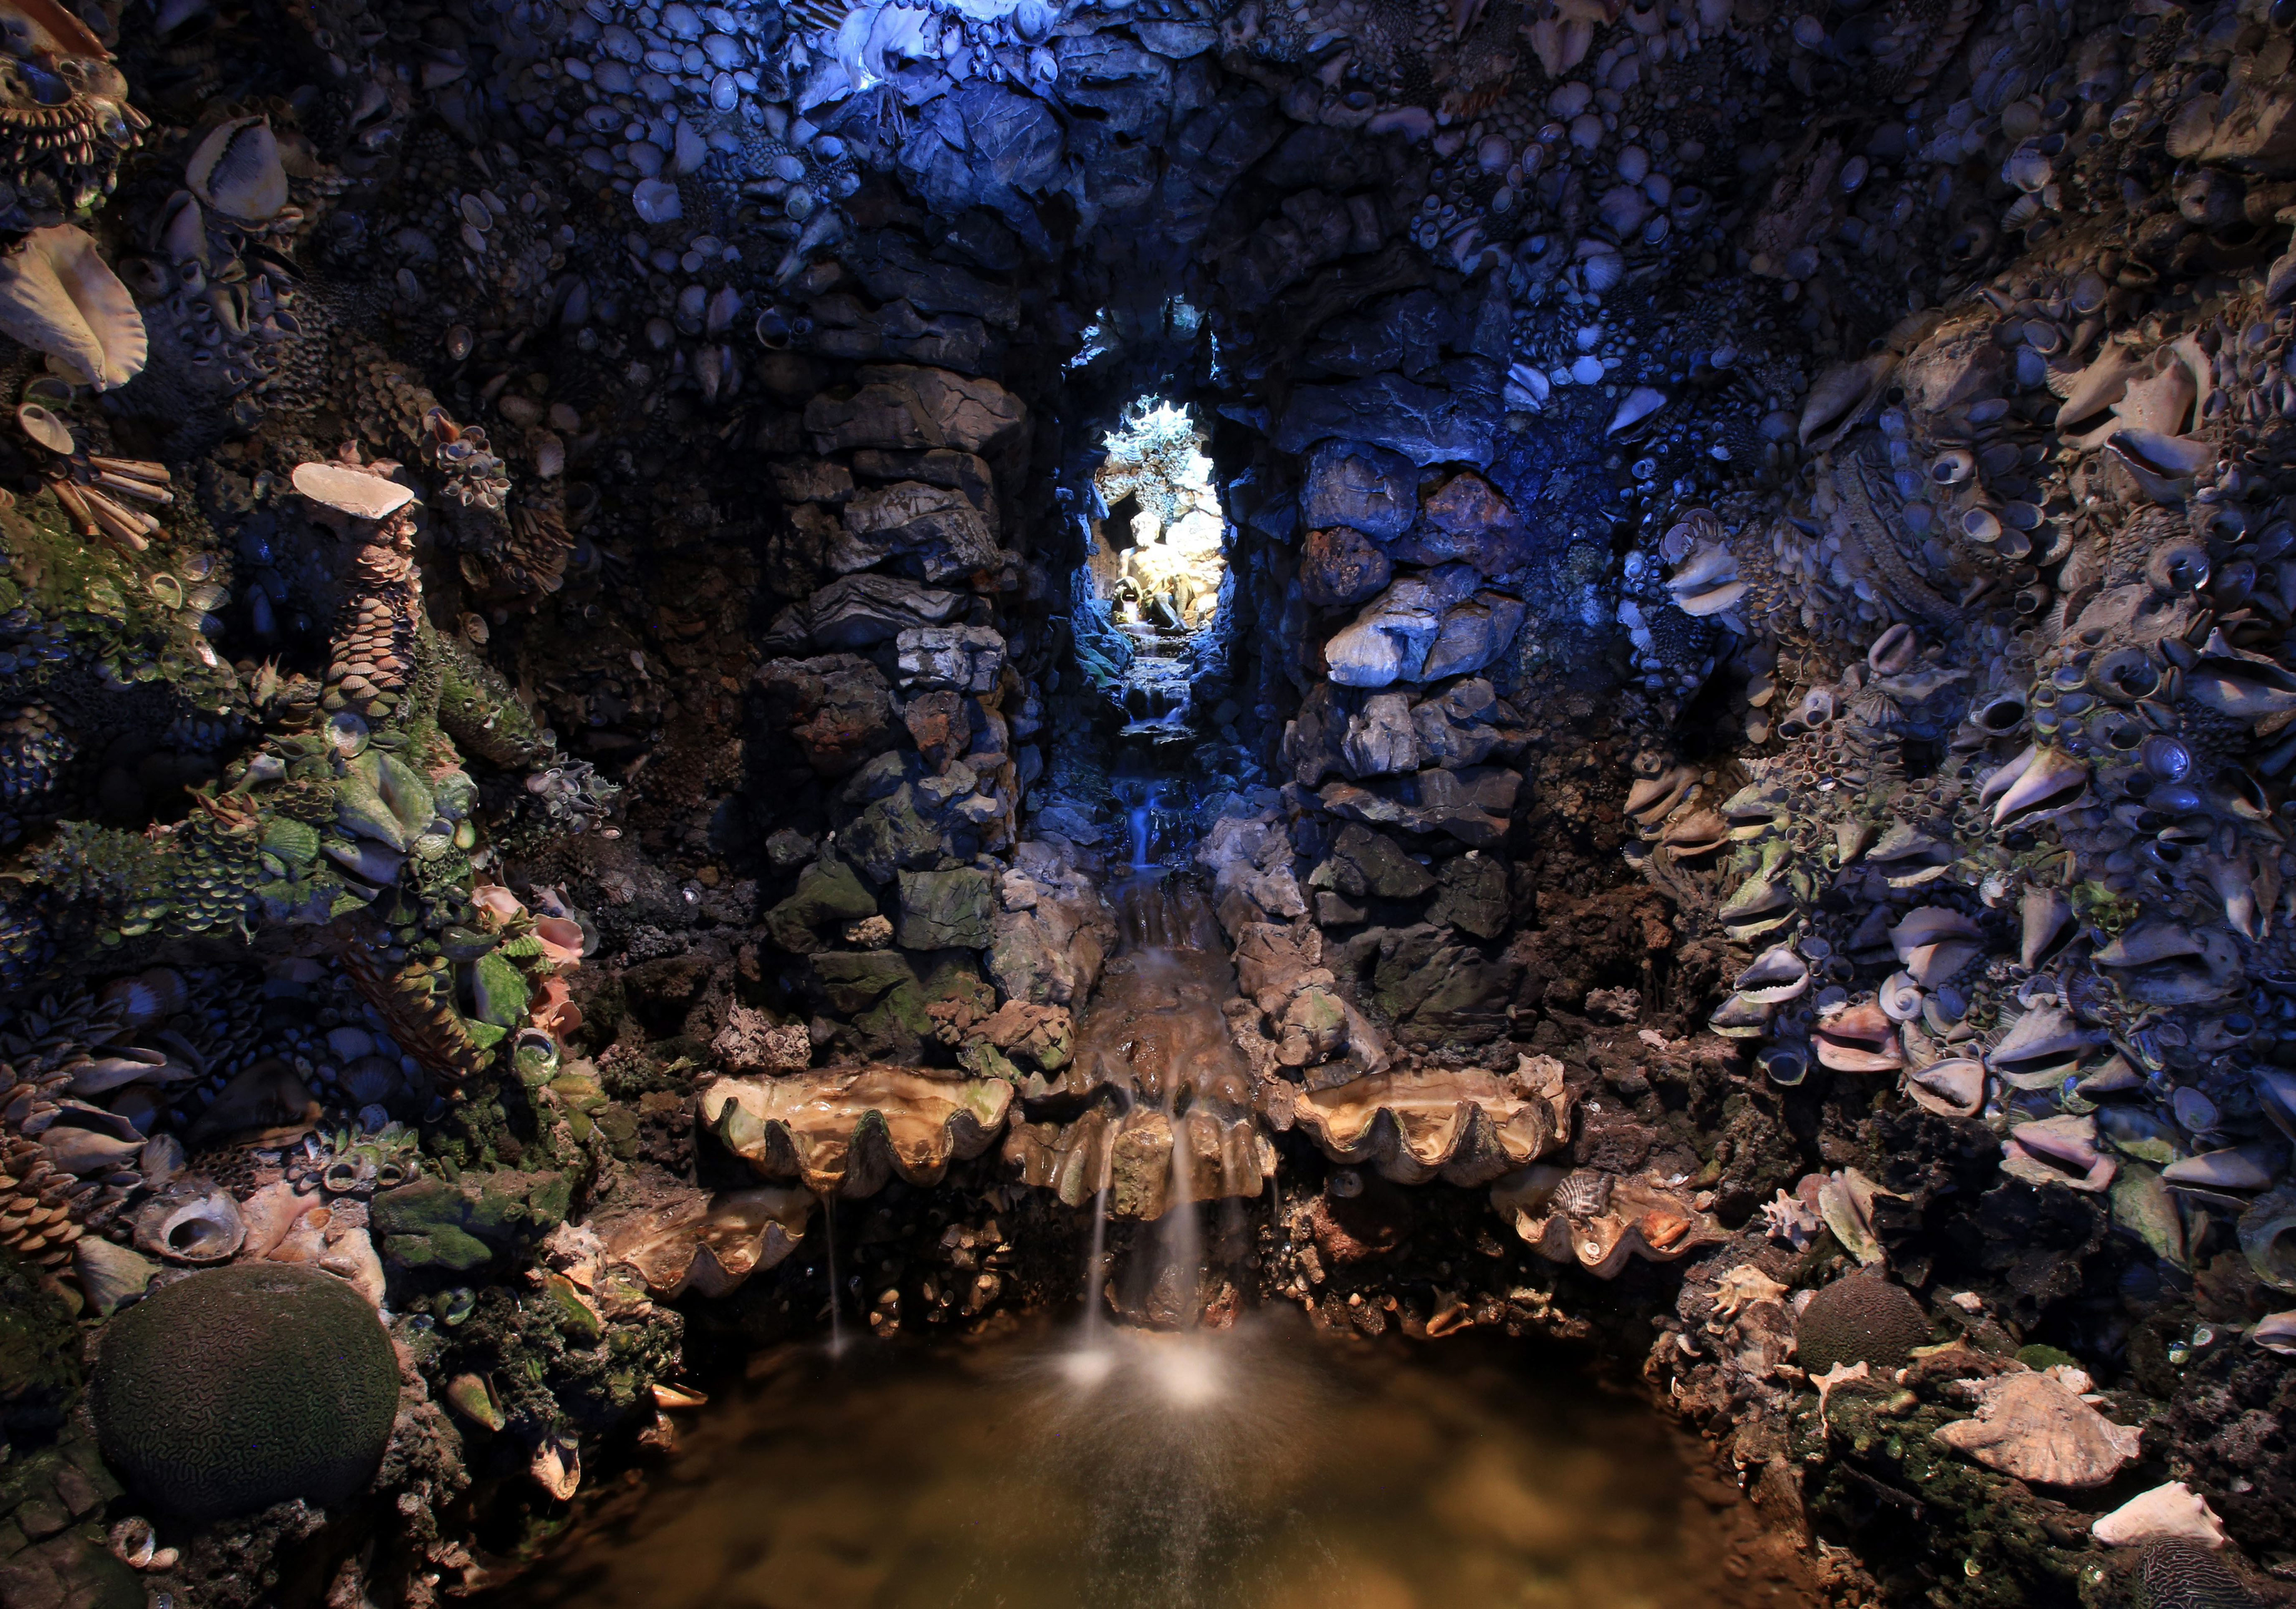 One visitor described the grotto as a 'dazzling sight to behold'